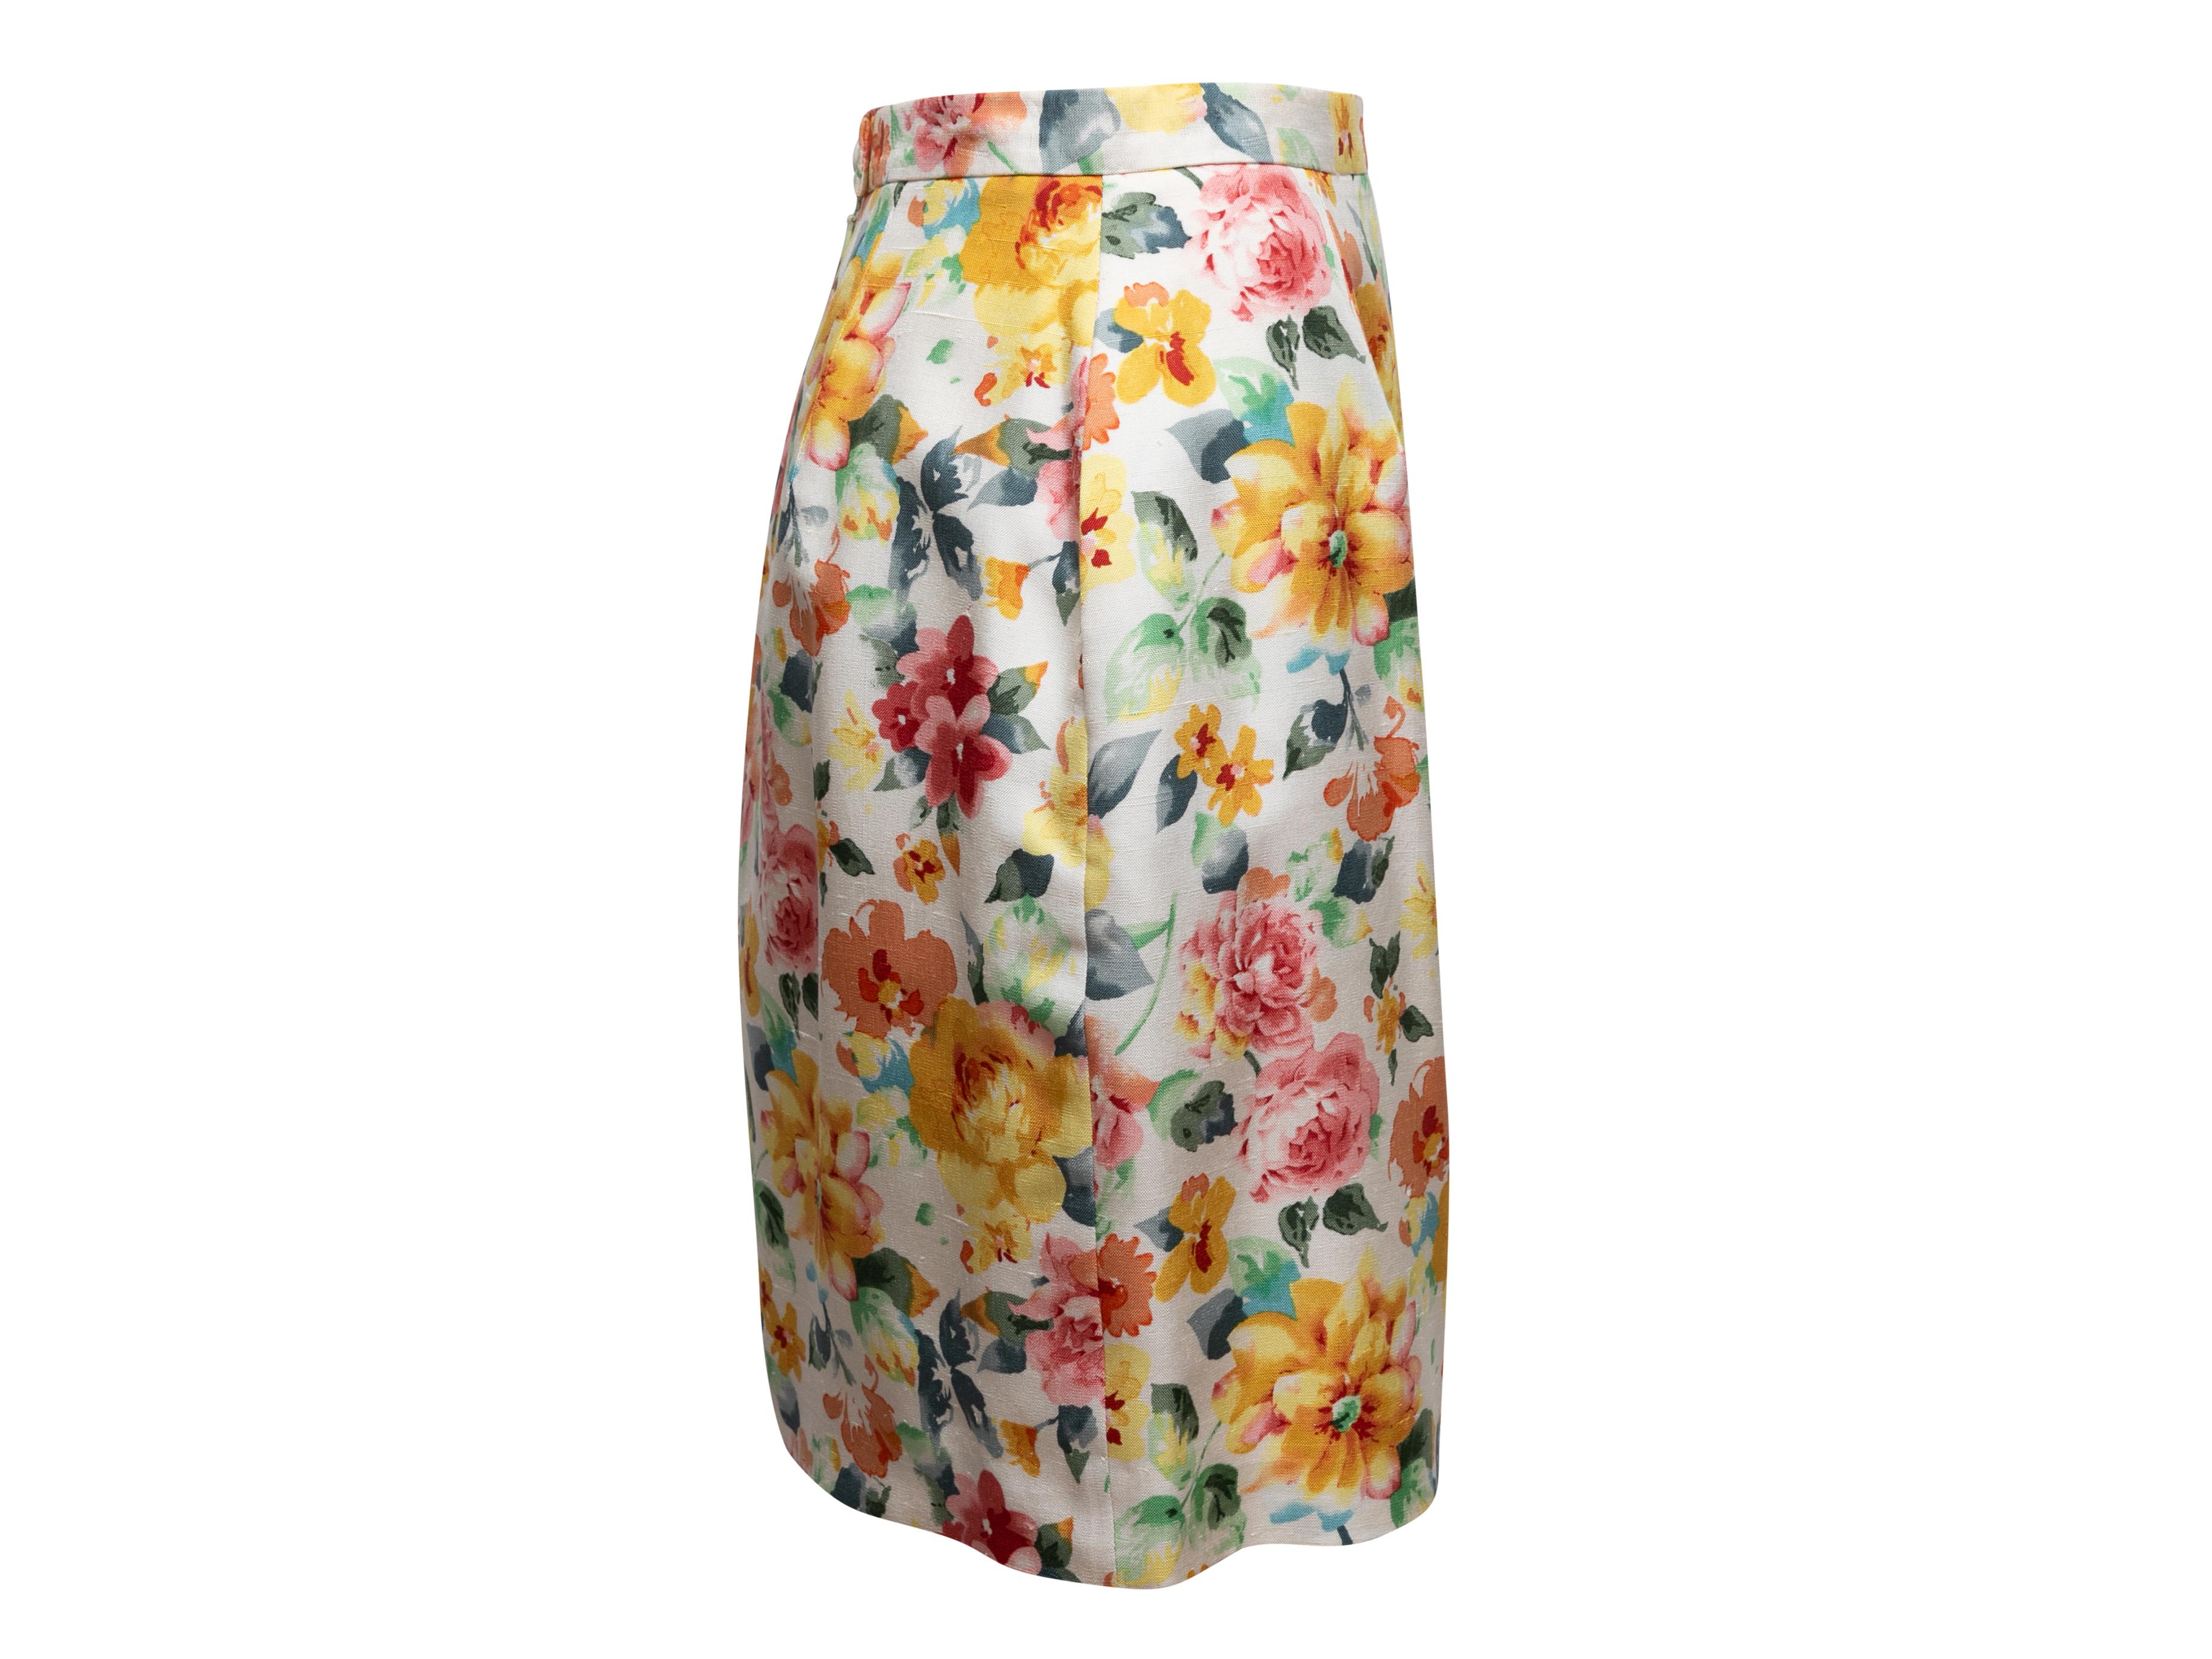 White and multicolor floral print pencil skirt by Christian Dior. Zip and button closures at back. 27